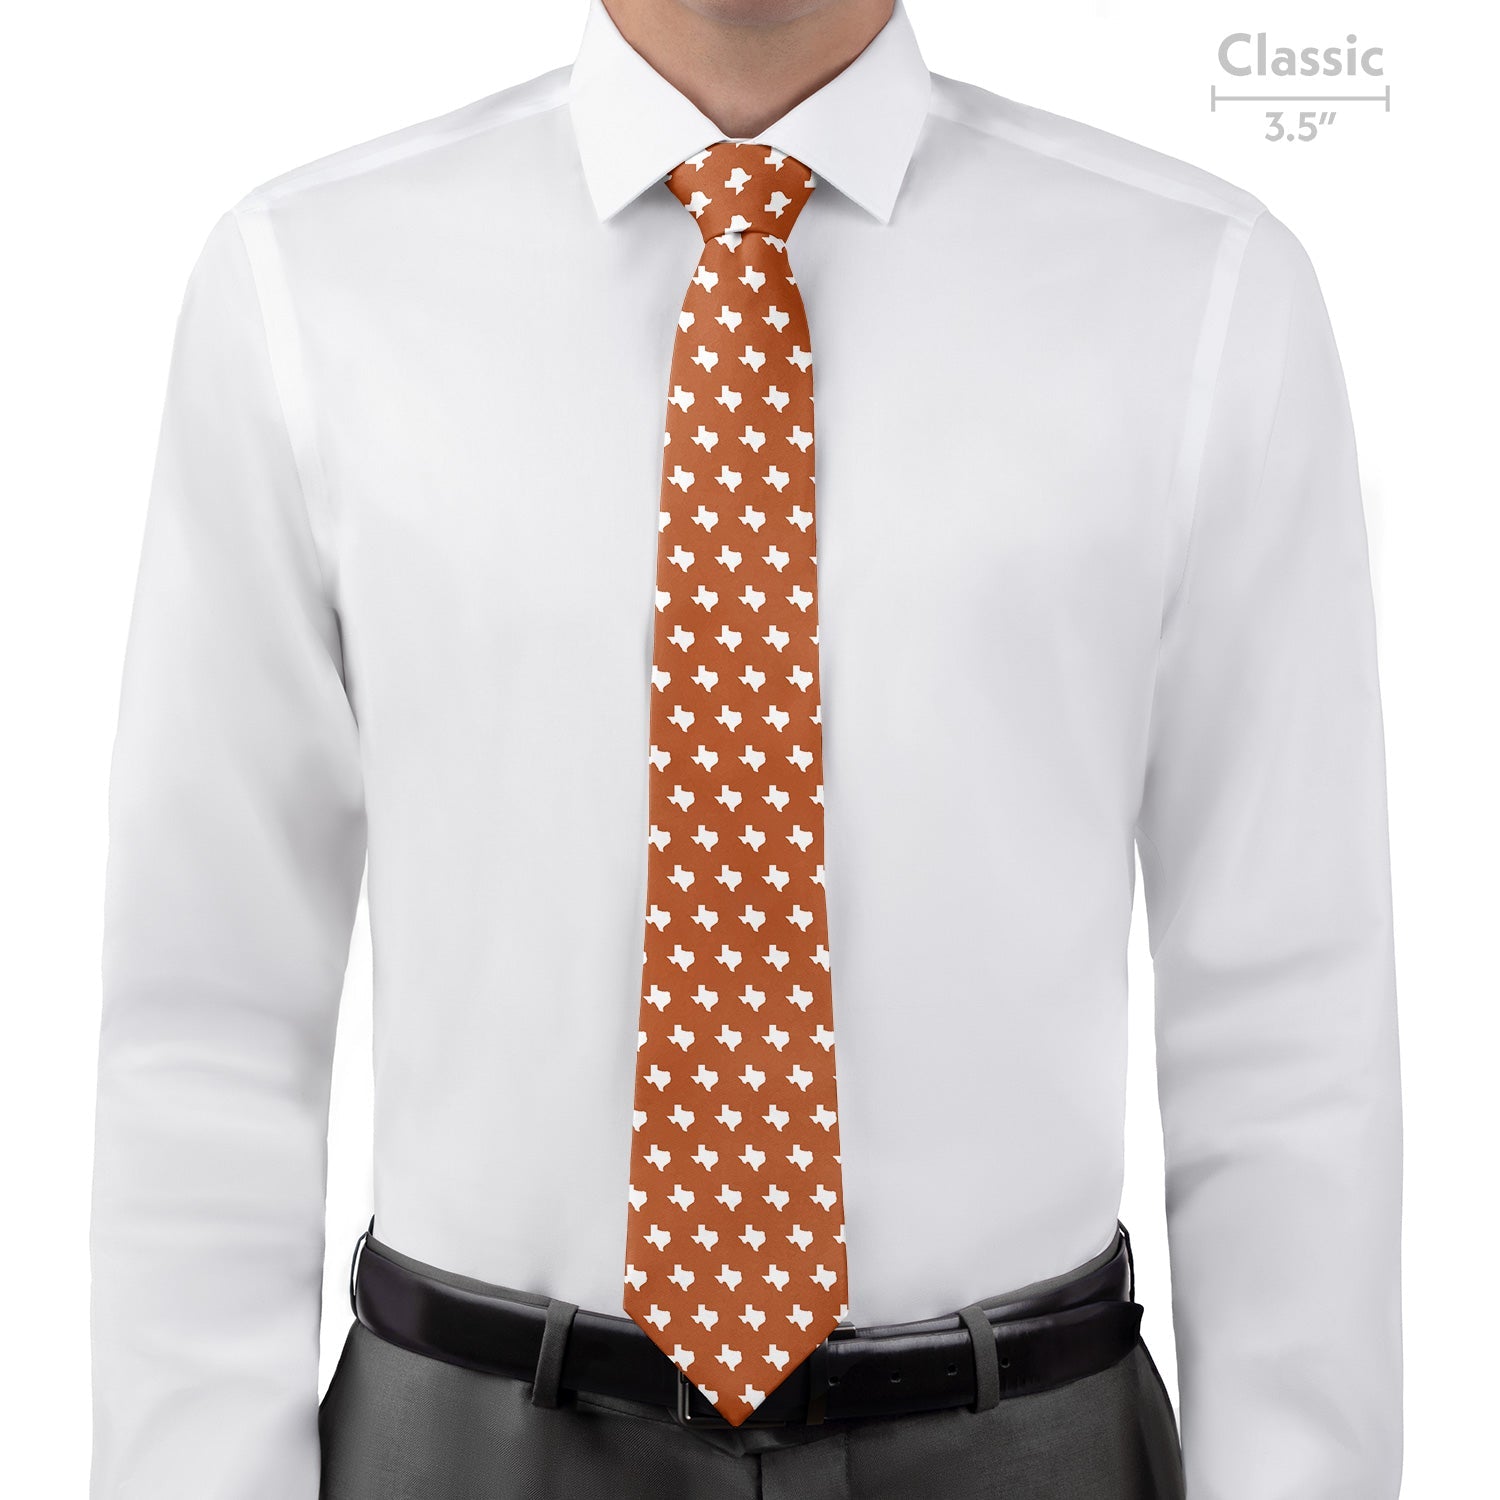 Texas State Outline Necktie - Classic - Knotty Tie Co.